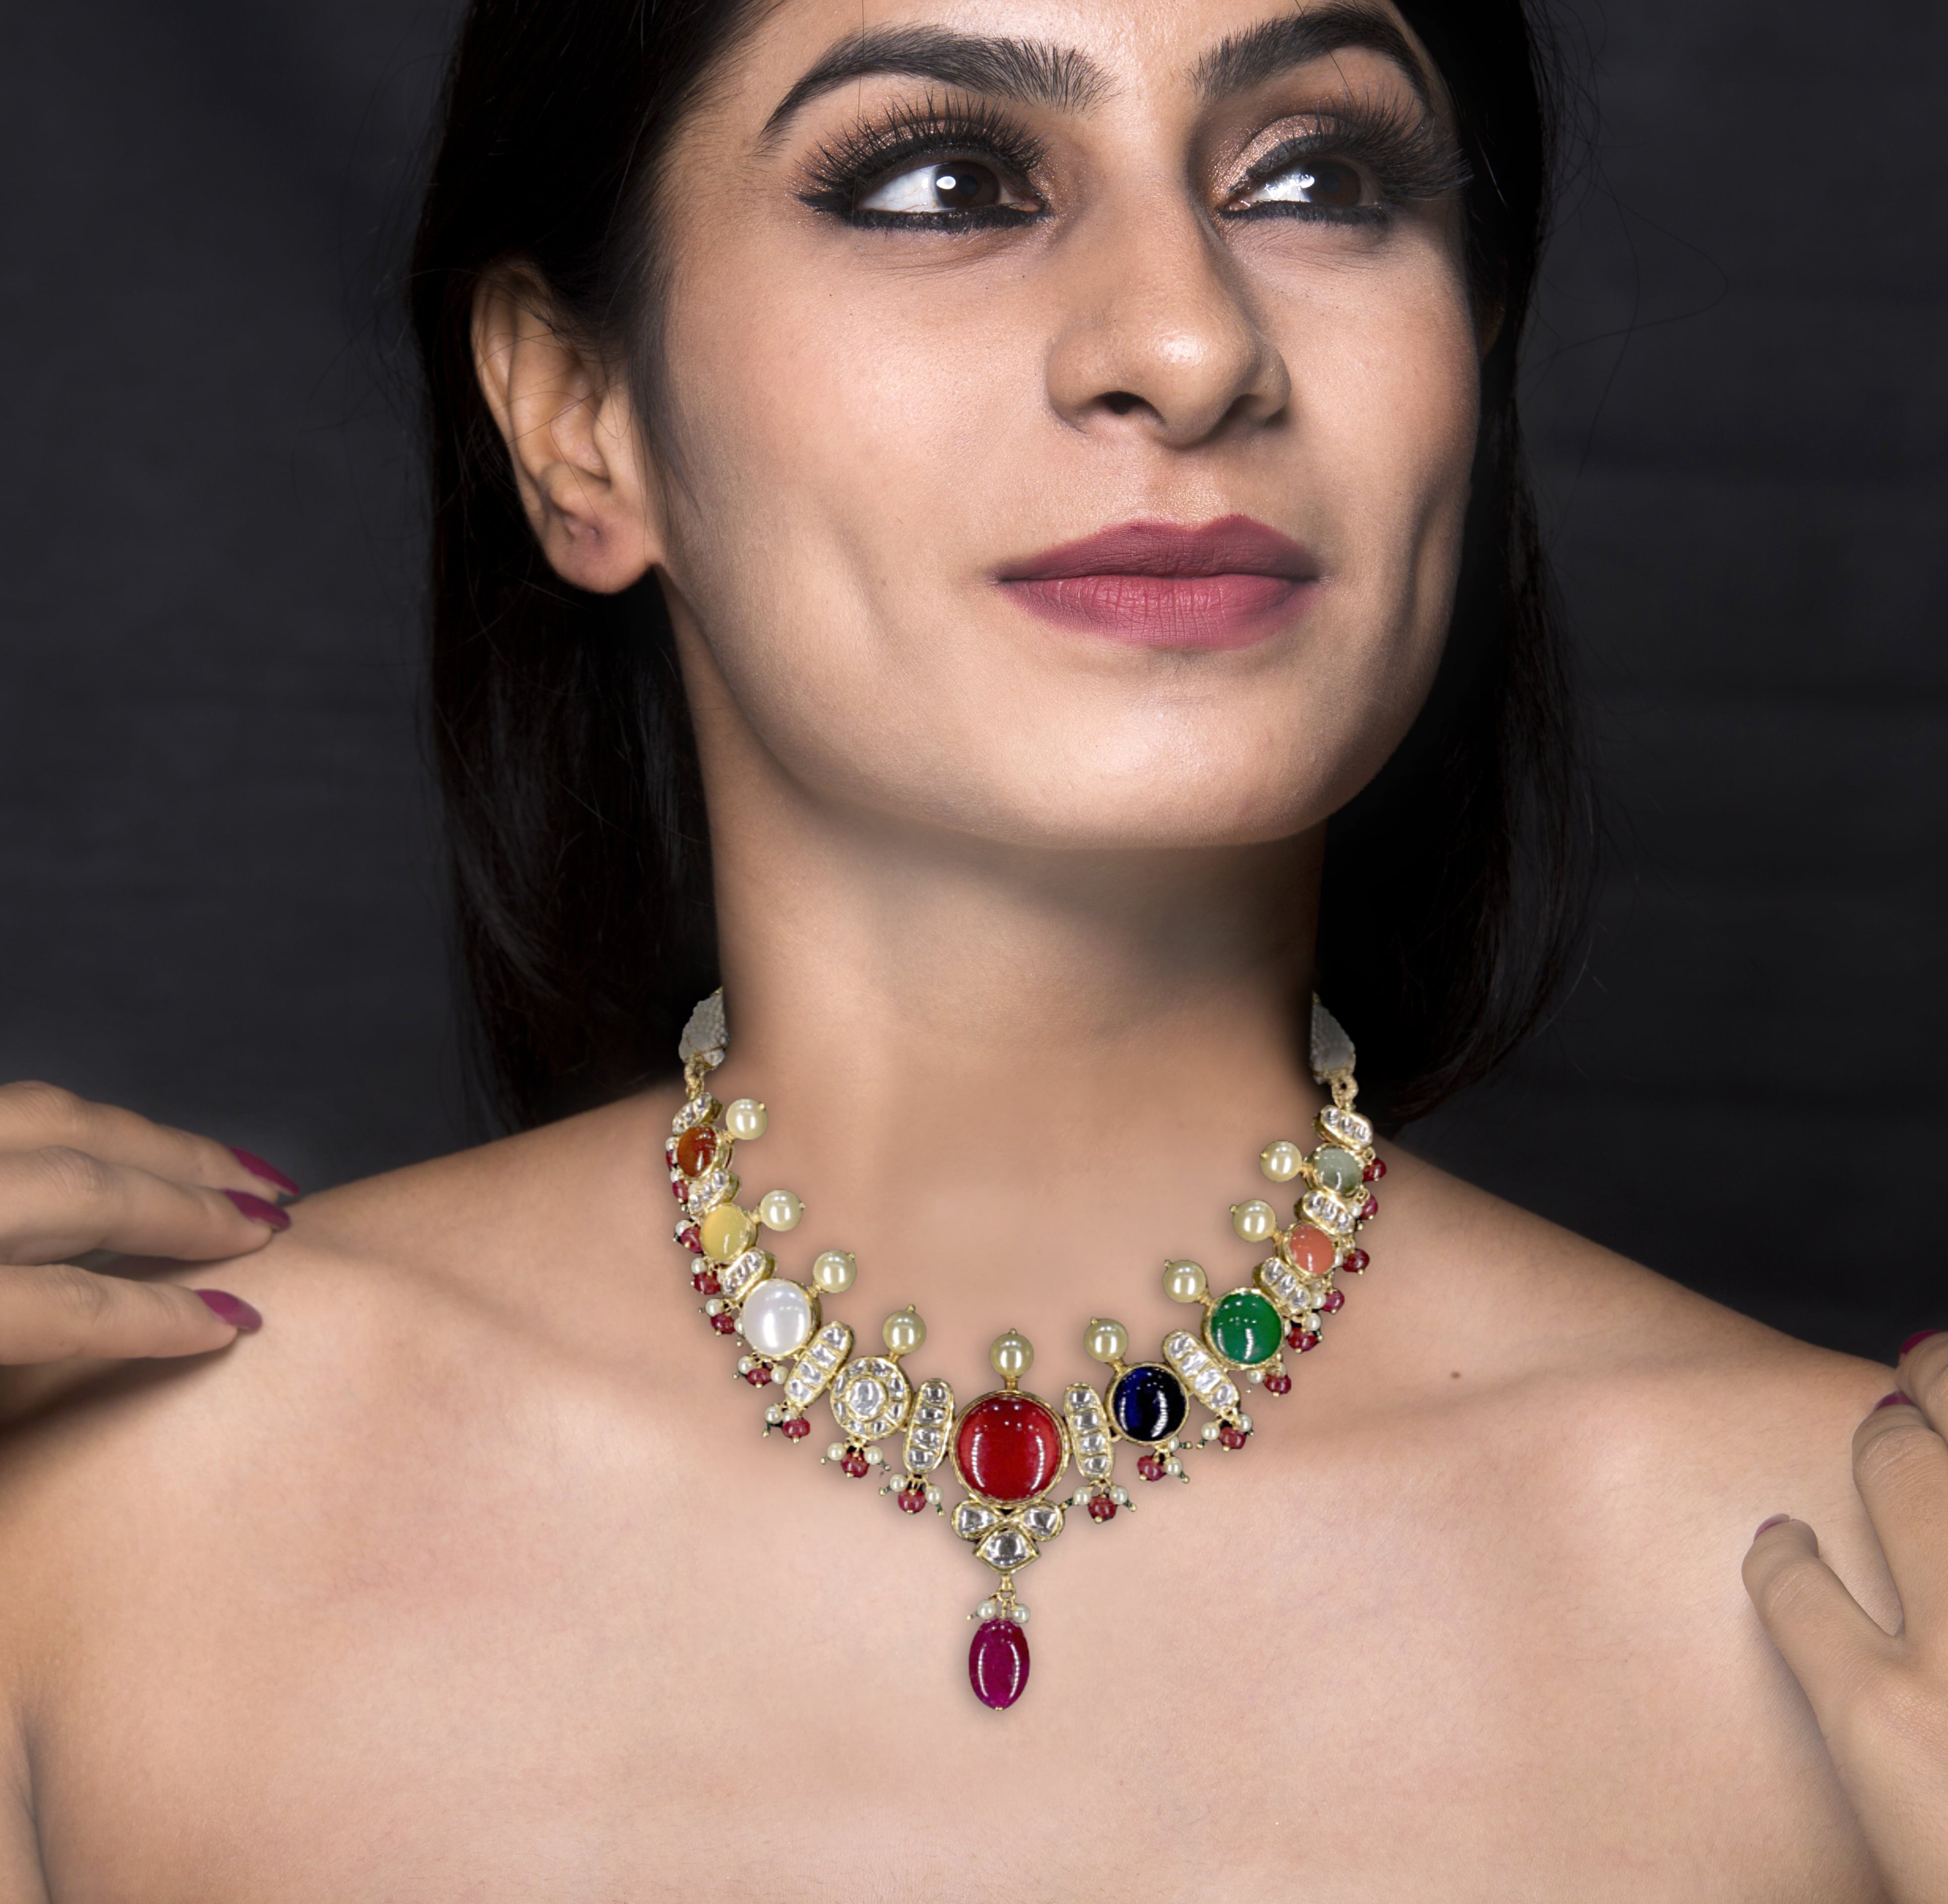 18k Gold and Diamond Polki Navratna Necklace Set enhanced with Rubies and Pearls